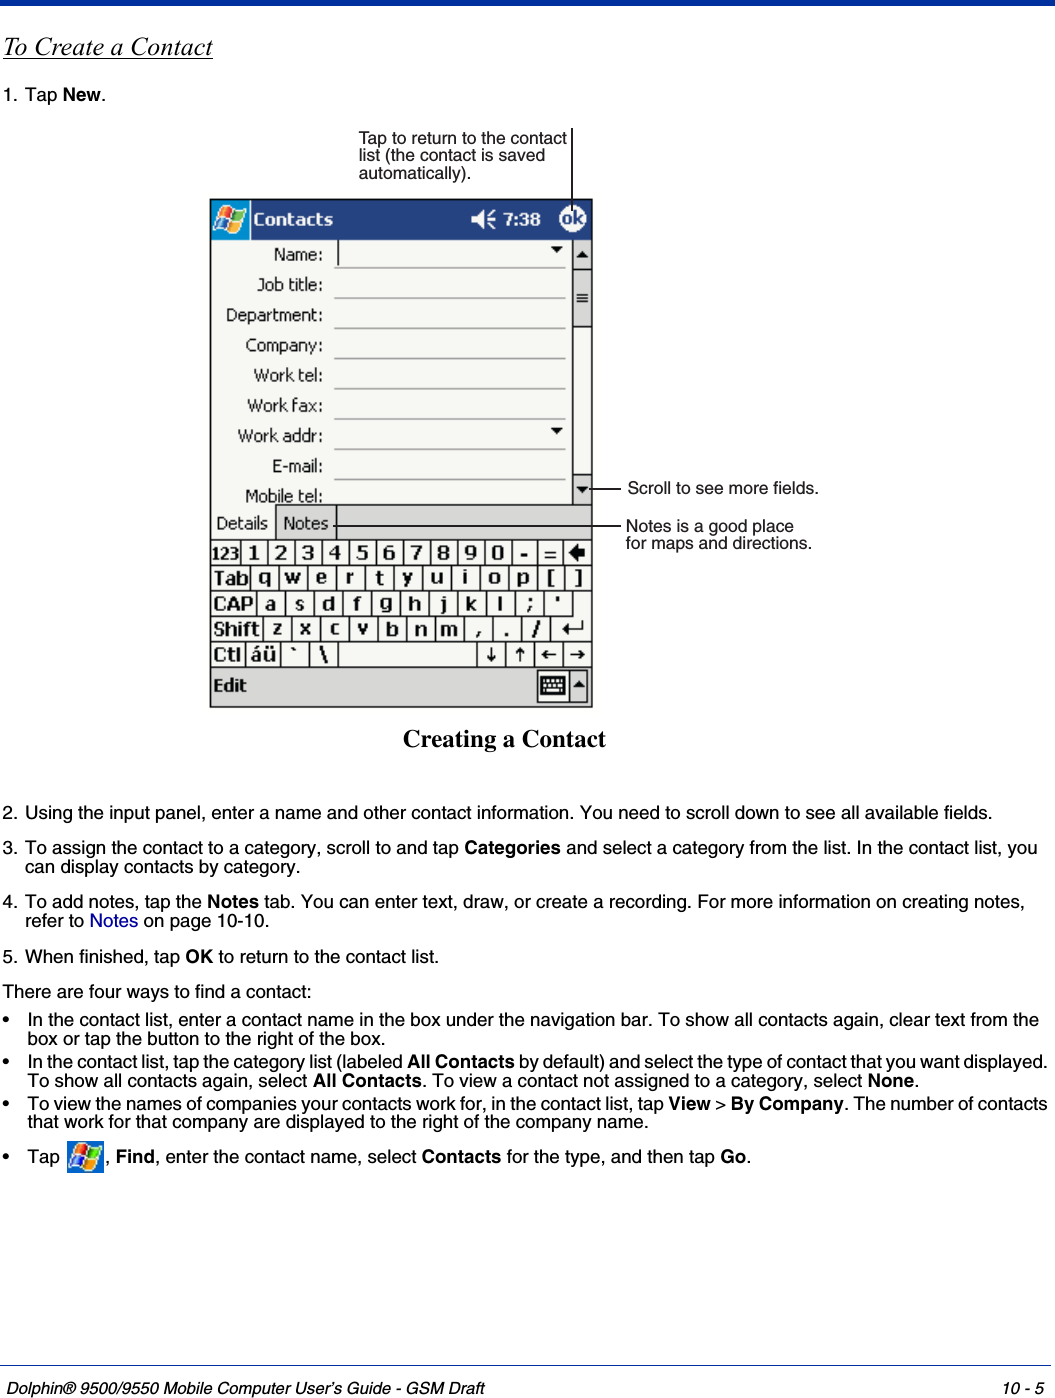 Dolphin® 9500/9550 Mobile Computer User’s Guide - GSM Draft 10 - 5To Create a Contact1. Tap New.2. Using the input panel, enter a name and other contact information. You need to scroll down to see all available fields.3. To assign the contact to a category, scroll to and tap Categories and select a category from the list. In the contact list, you can display contacts by category.4. To add notes, tap the Notes tab. You can enter text, draw, or create a recording. For more information on creating notes, refer to Notes on page 10-10.5. When finished, tap OK to return to the contact list.There are four ways to find a contact: • In the contact list, enter a contact name in the box under the navigation bar. To show all contacts again, clear text from the box or tap the button to the right of the box. • In the contact list, tap the category list (labeled All Contacts by default) and select the type of contact that you want displayed. To show all contacts again, select All Contacts. To view a contact not assigned to a category, select None. • To view the names of companies your contacts work for, in the contact list, tap View &gt; By Company. The number of contacts that work for that company are displayed to the right of the company name. •Tap , Find, enter the contact name, select Contacts for the type, and then tap Go. Notes is a good placefor maps and directions.Tap to return to the contactlist (the contact is savedautomatically).Scroll to see more fields.Creating a Contact